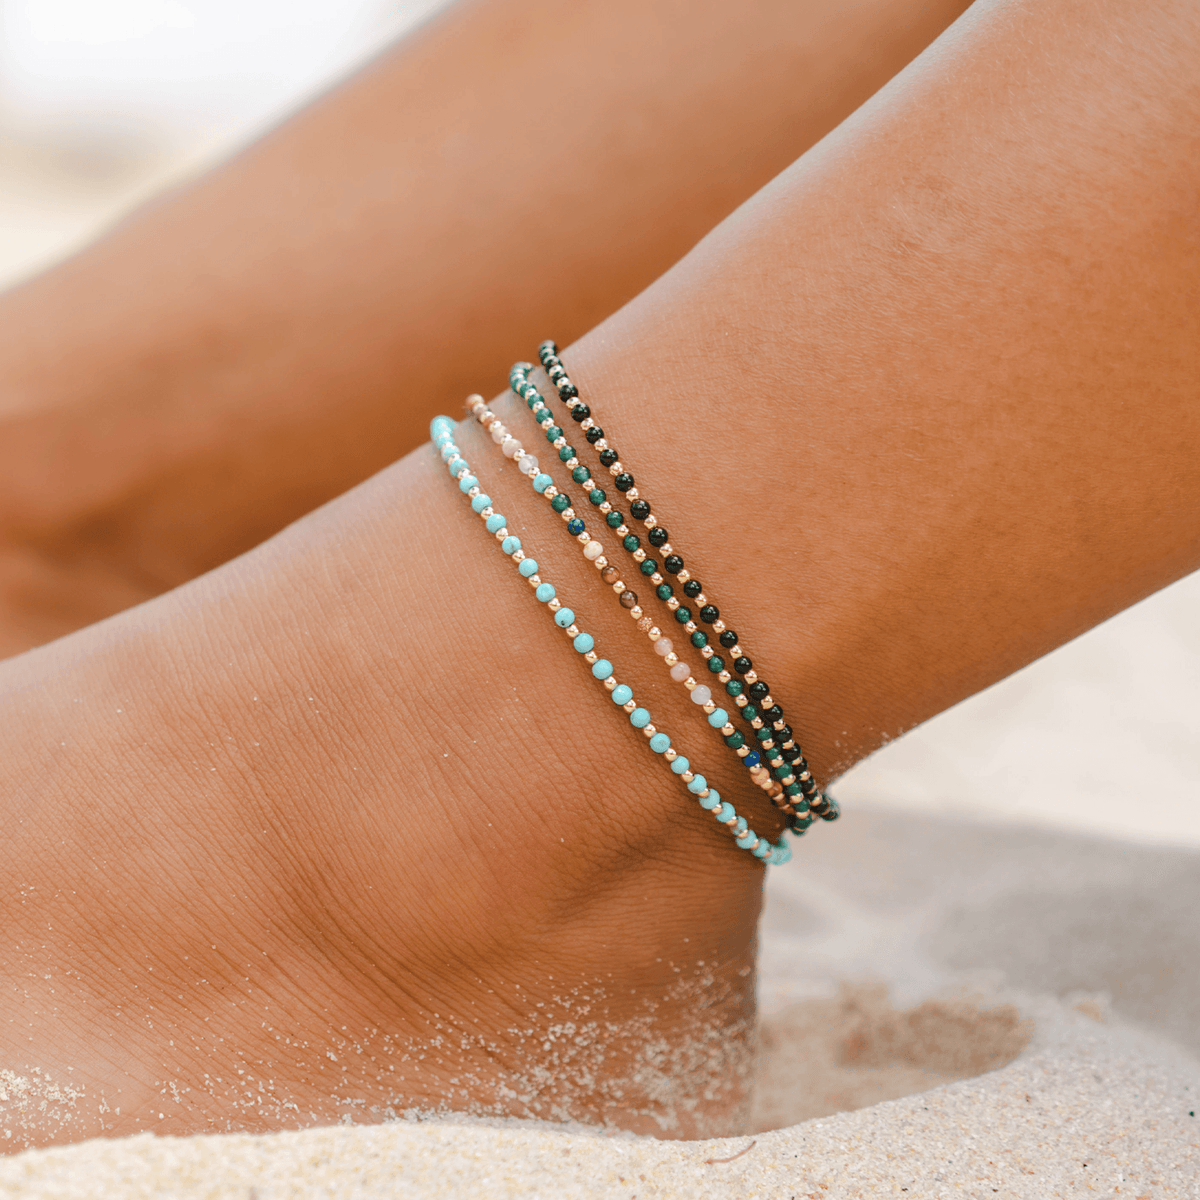 Model wearing a stack of four healing anklets. The anklets include a 2mm turquoise stone and gold bead healing anklet, a 2mm multicolor stone and gold bead healing anklet, a 2mm dark green stones and gold bead healing anklet and a 2mm onyx stone and gold bead healing anklet.